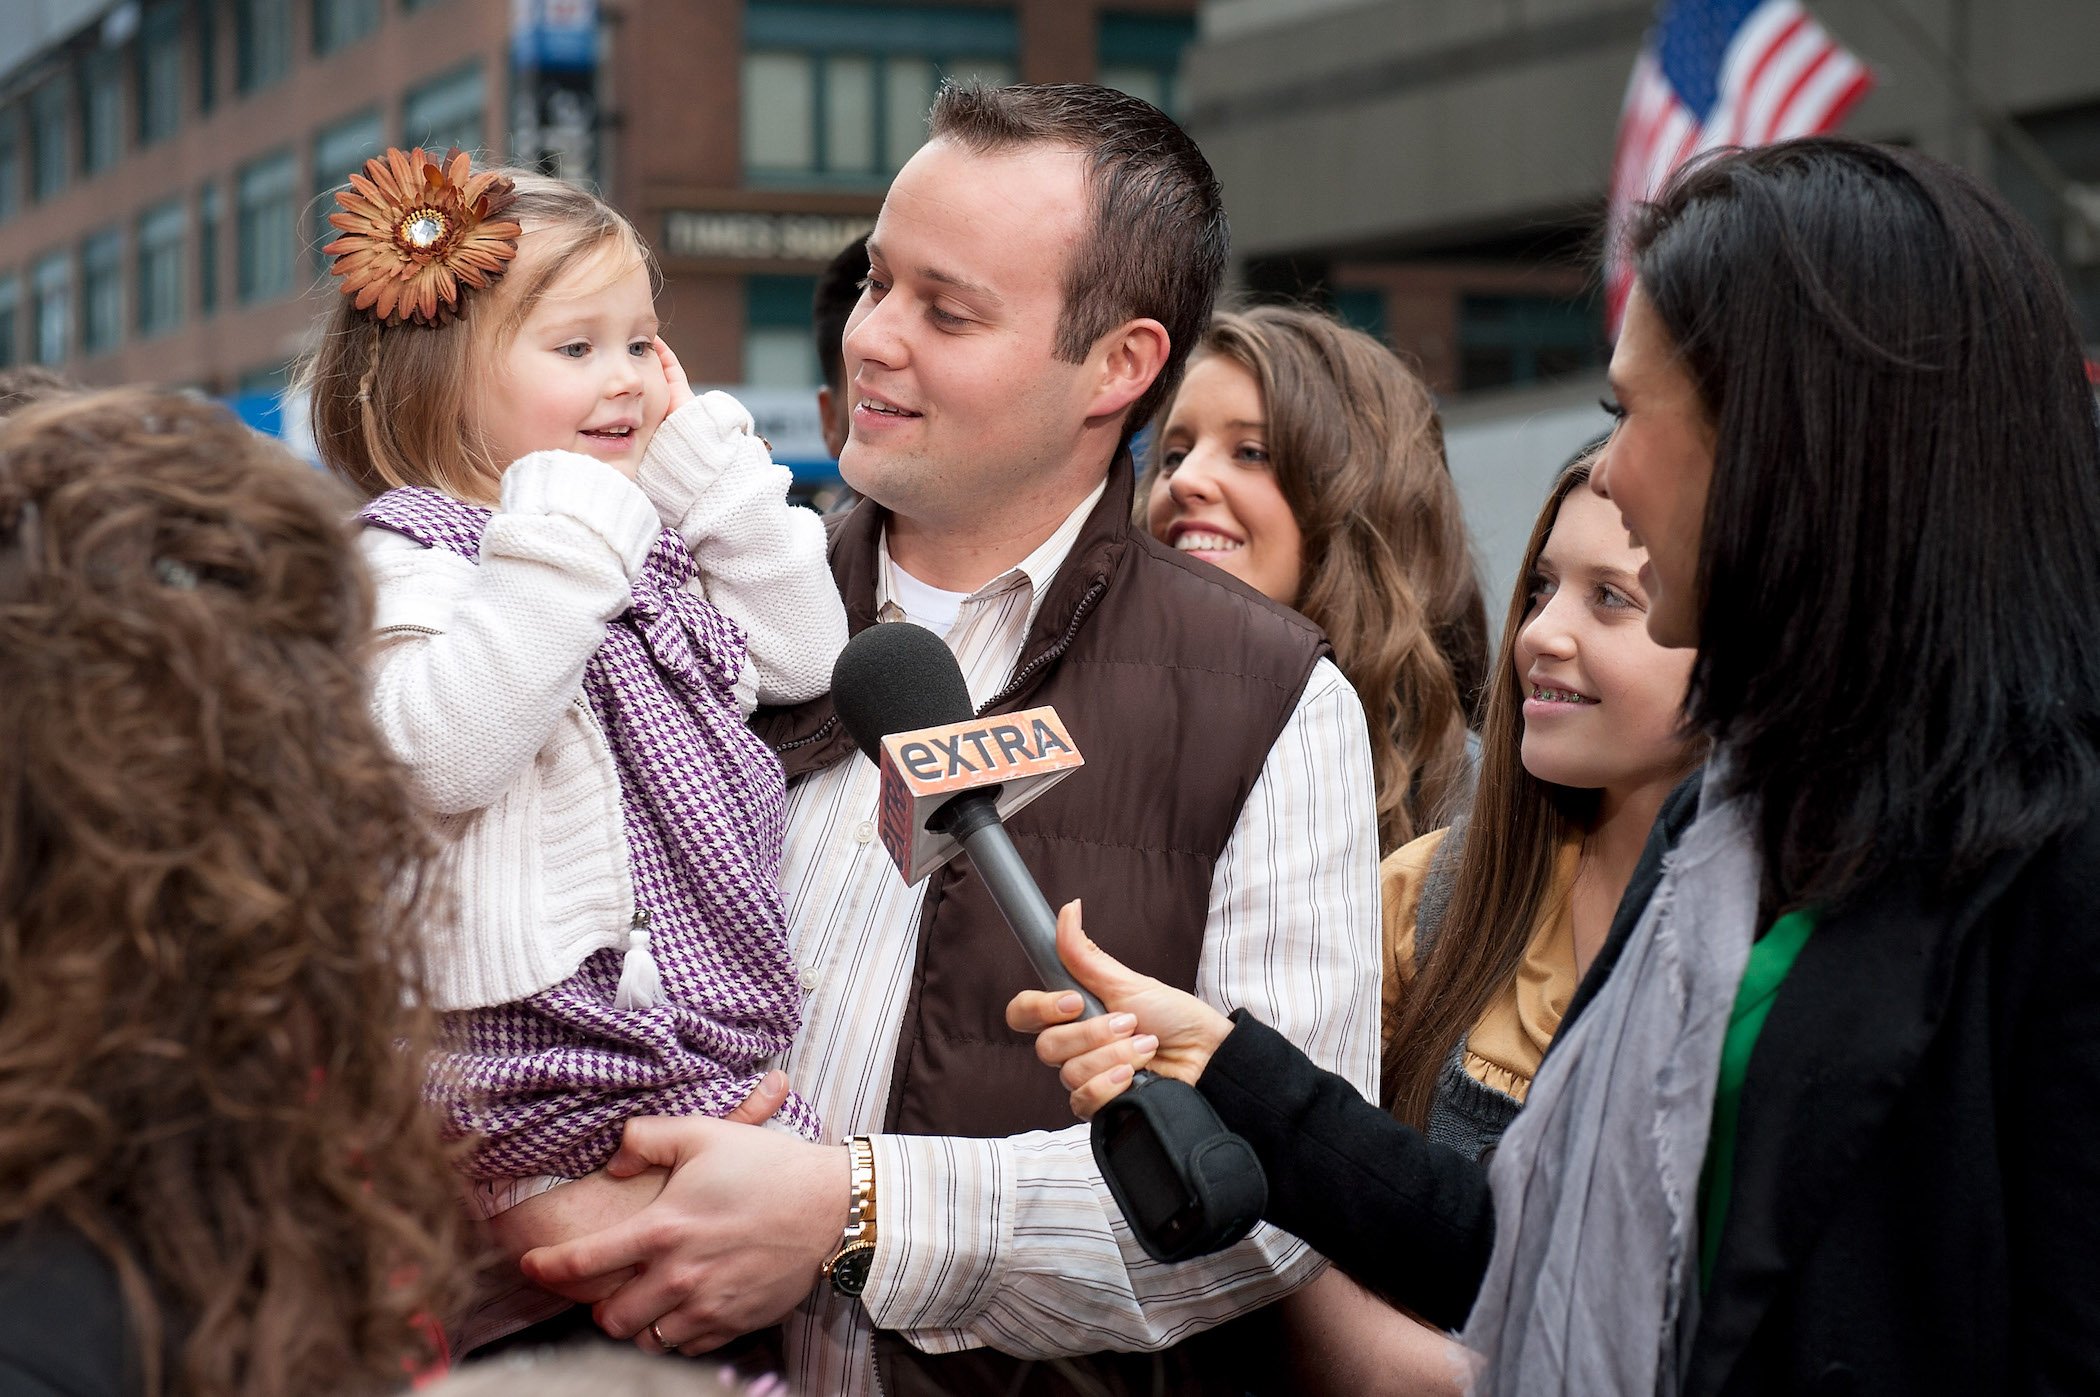 Josh Duggar of the Duggar family holding his young daughter with the other Duggars around him during an interview